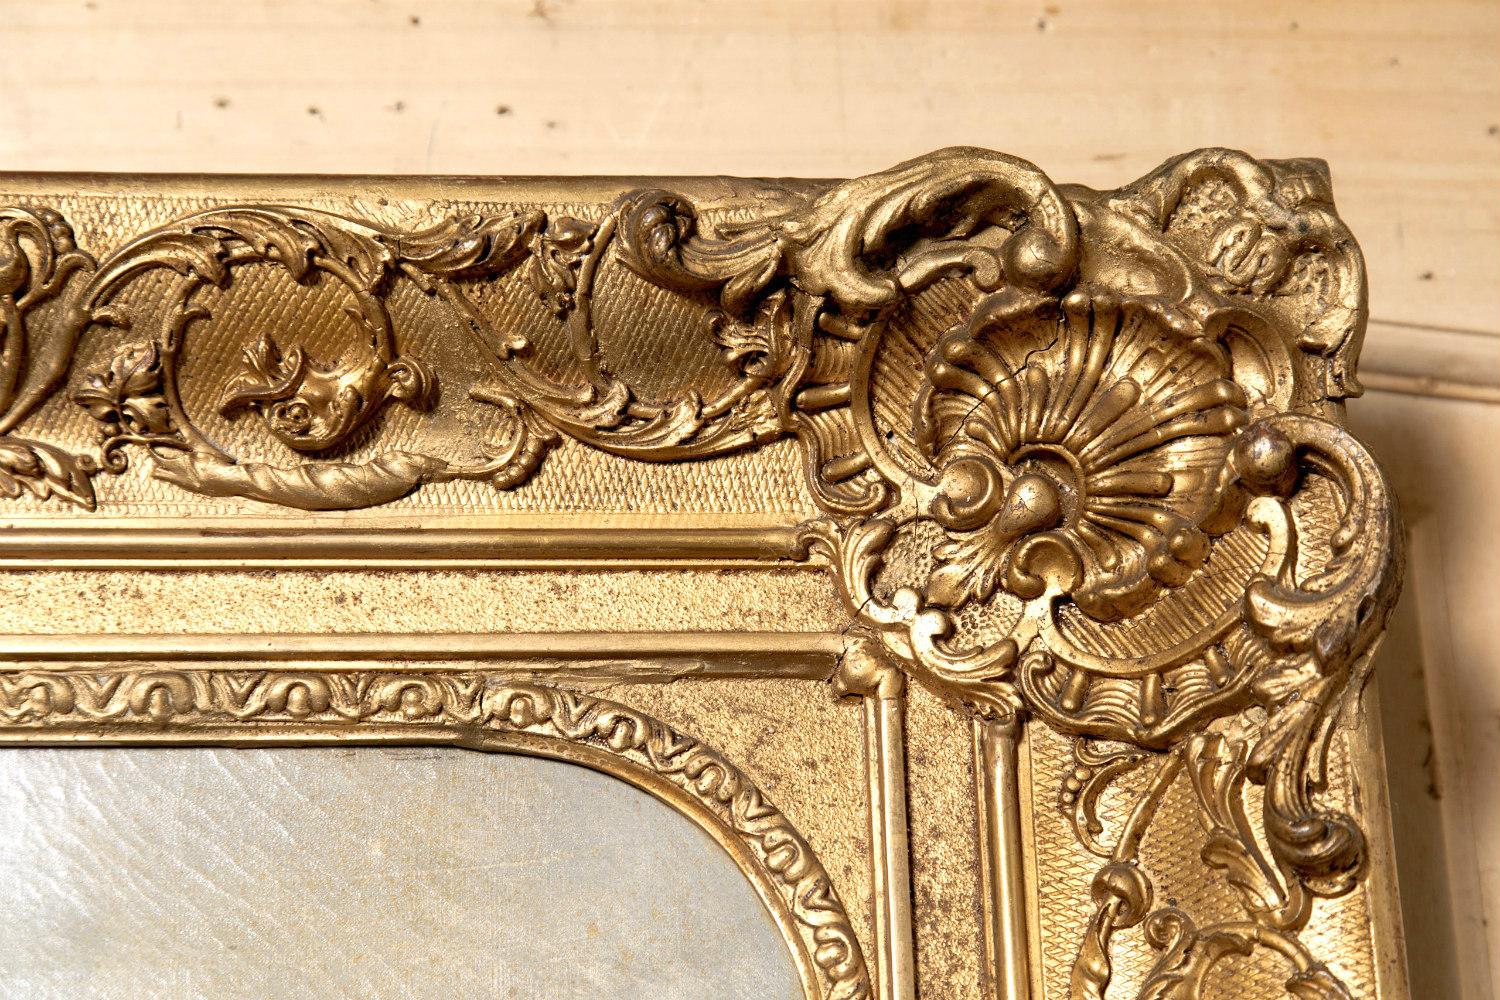 Early 19th Century French Framed Cow Painting, 